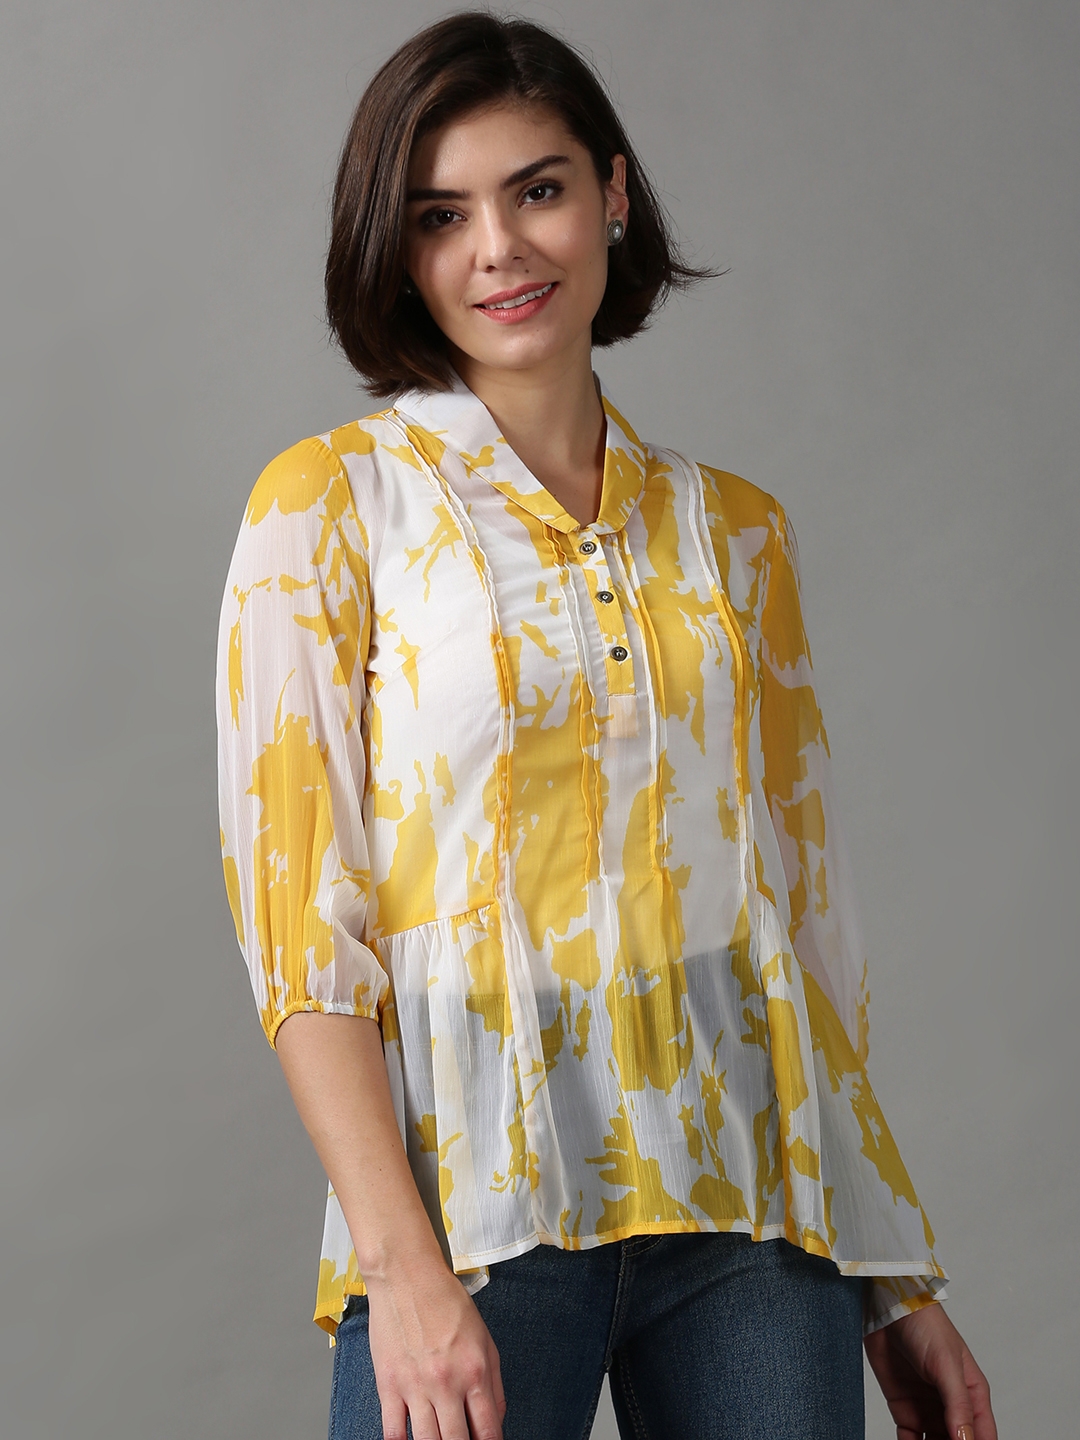 SHOWOFF Women's Regular Sleeves Abstract White Shirt Style Top